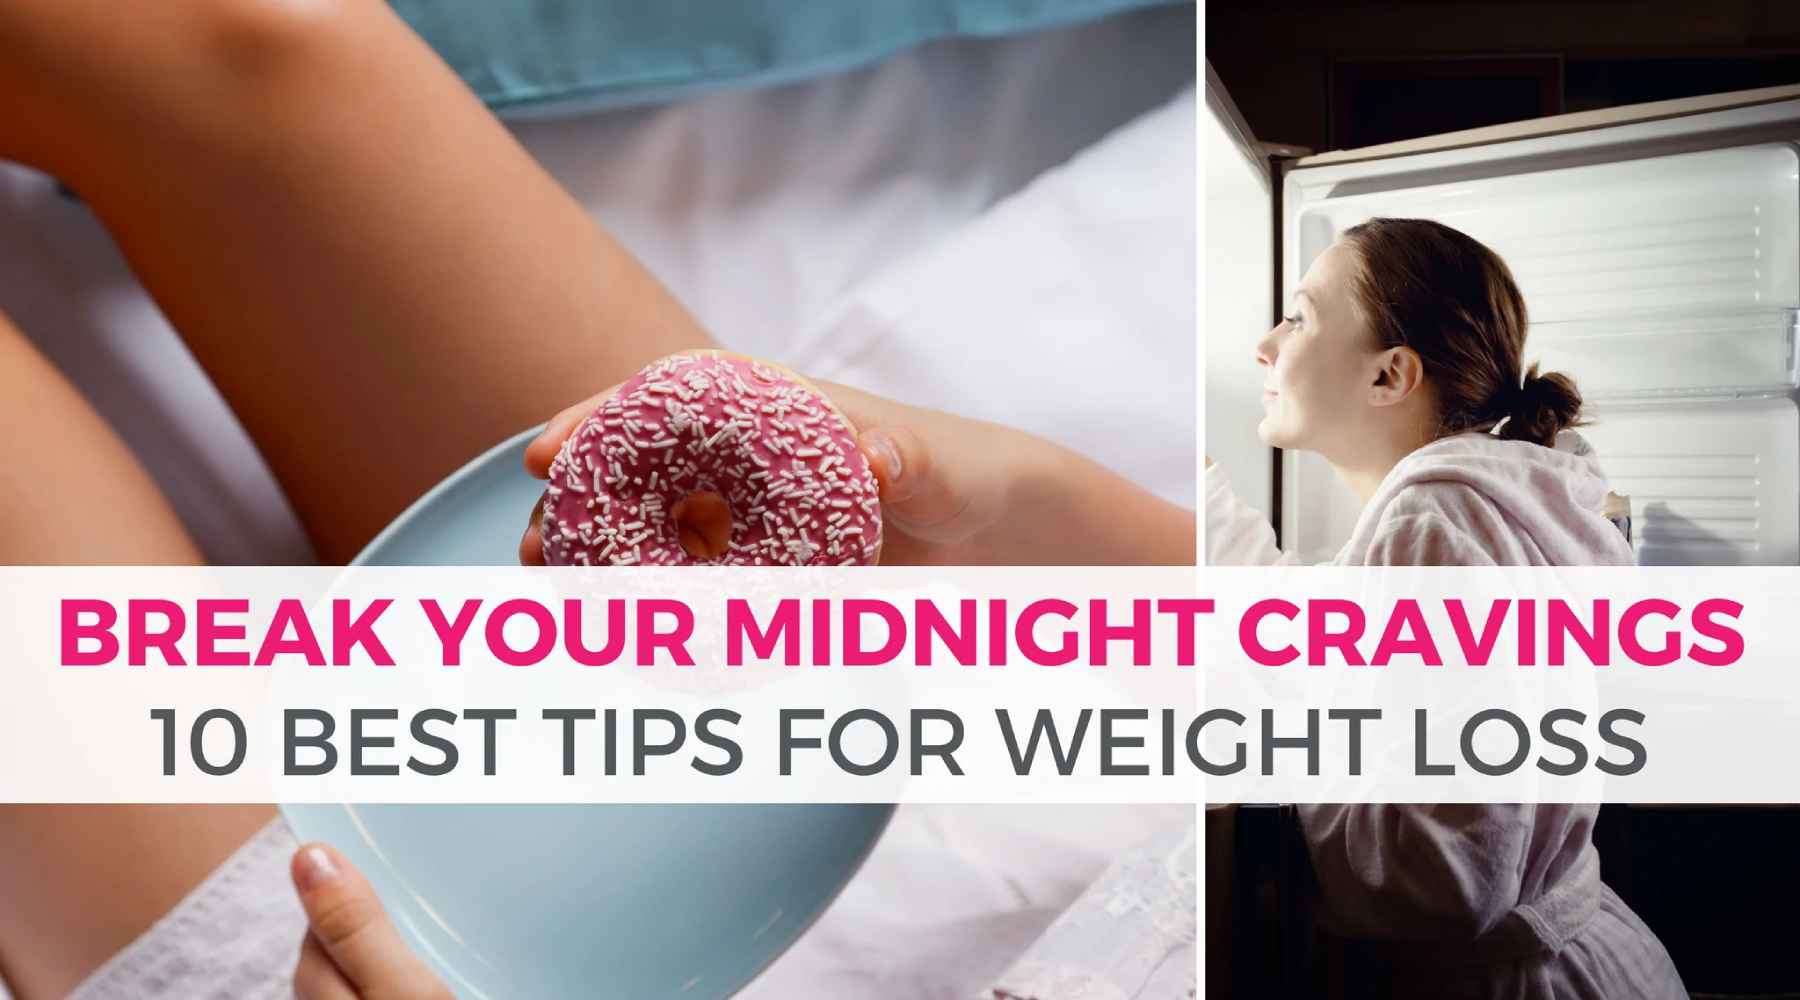 How to survive late night cravings and maintain my diet - Quora